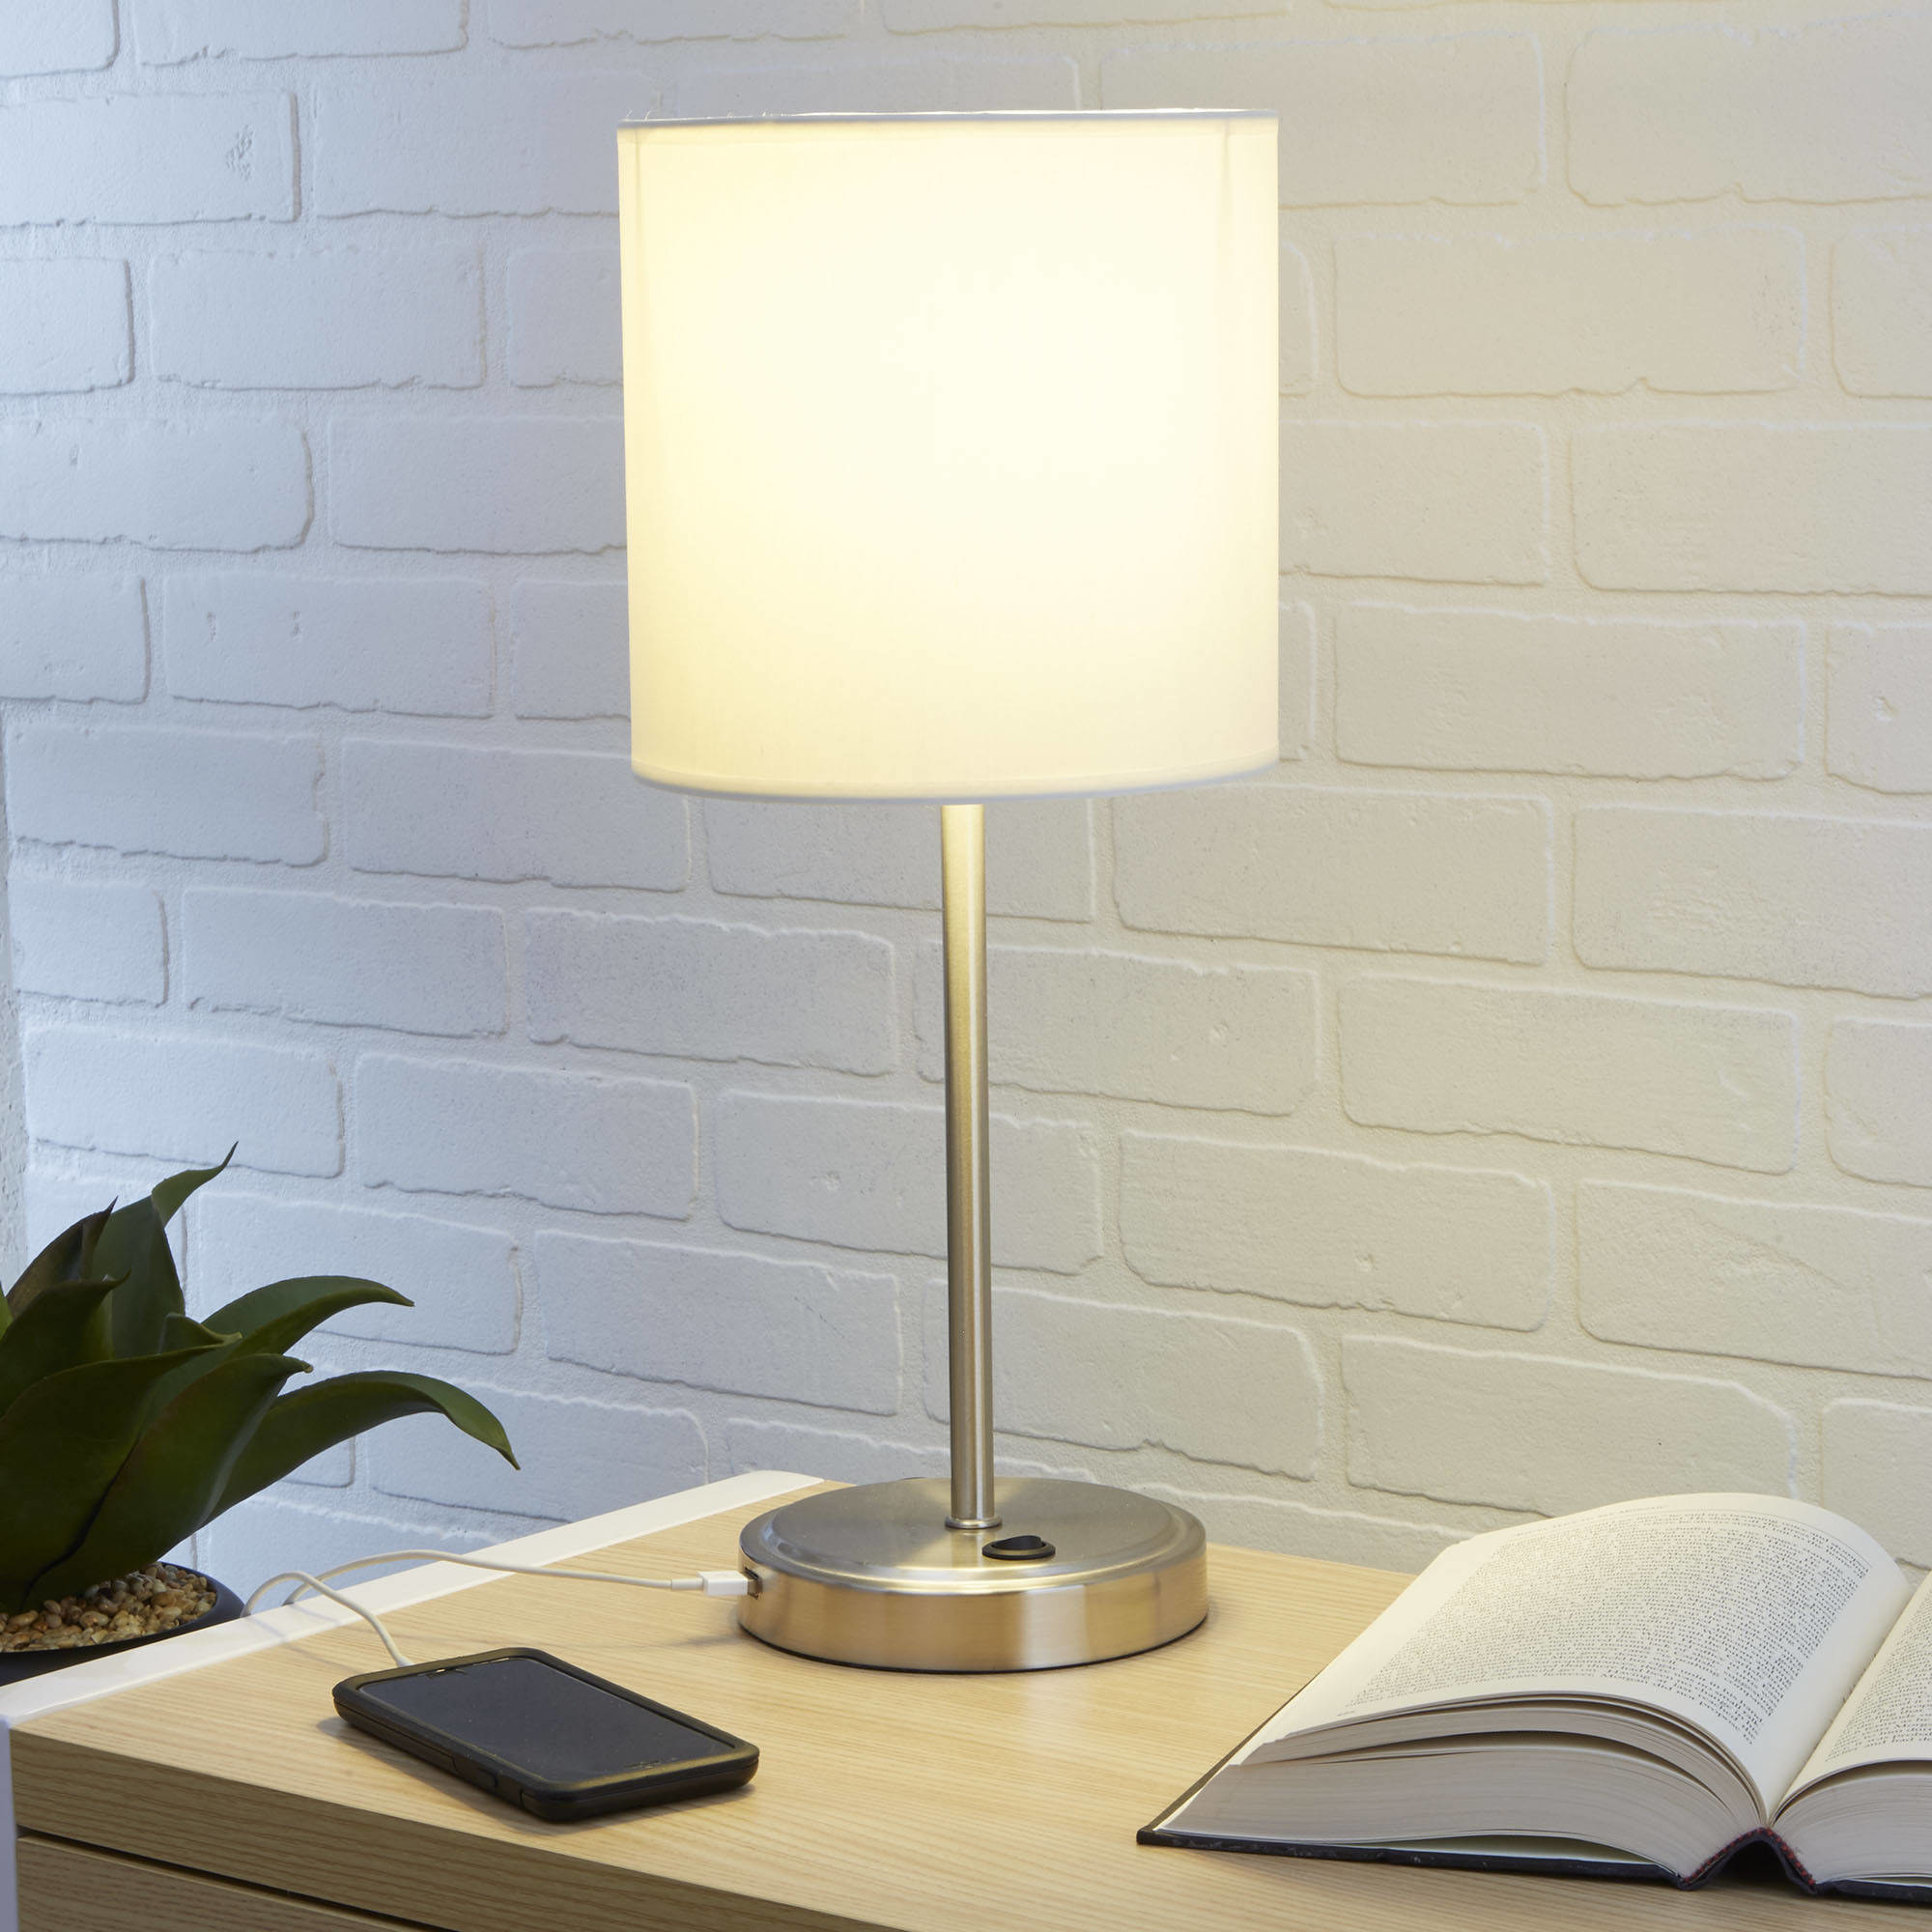 a silver lamp with a white shade and a place to plug in a usb cable